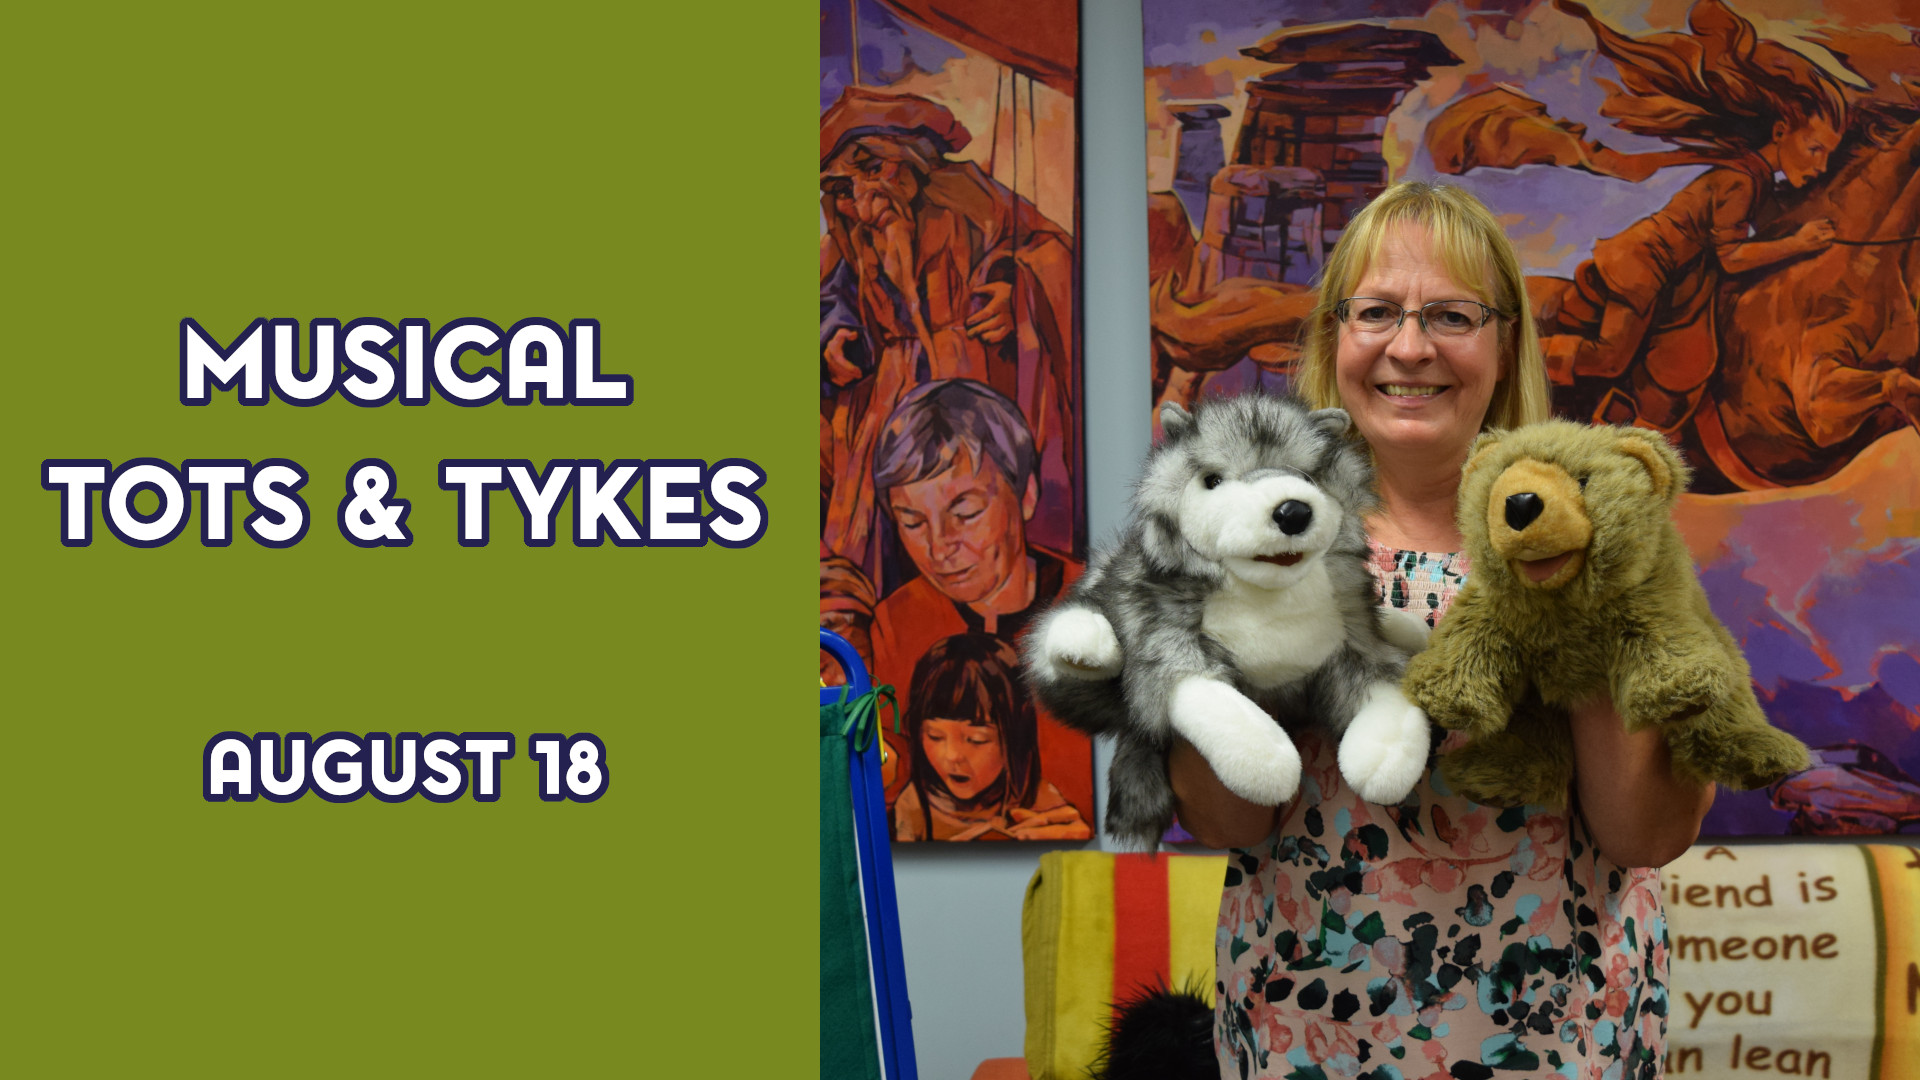 A woman holds stuffed animals next to the text "Musical Tots & Tykes August 18"